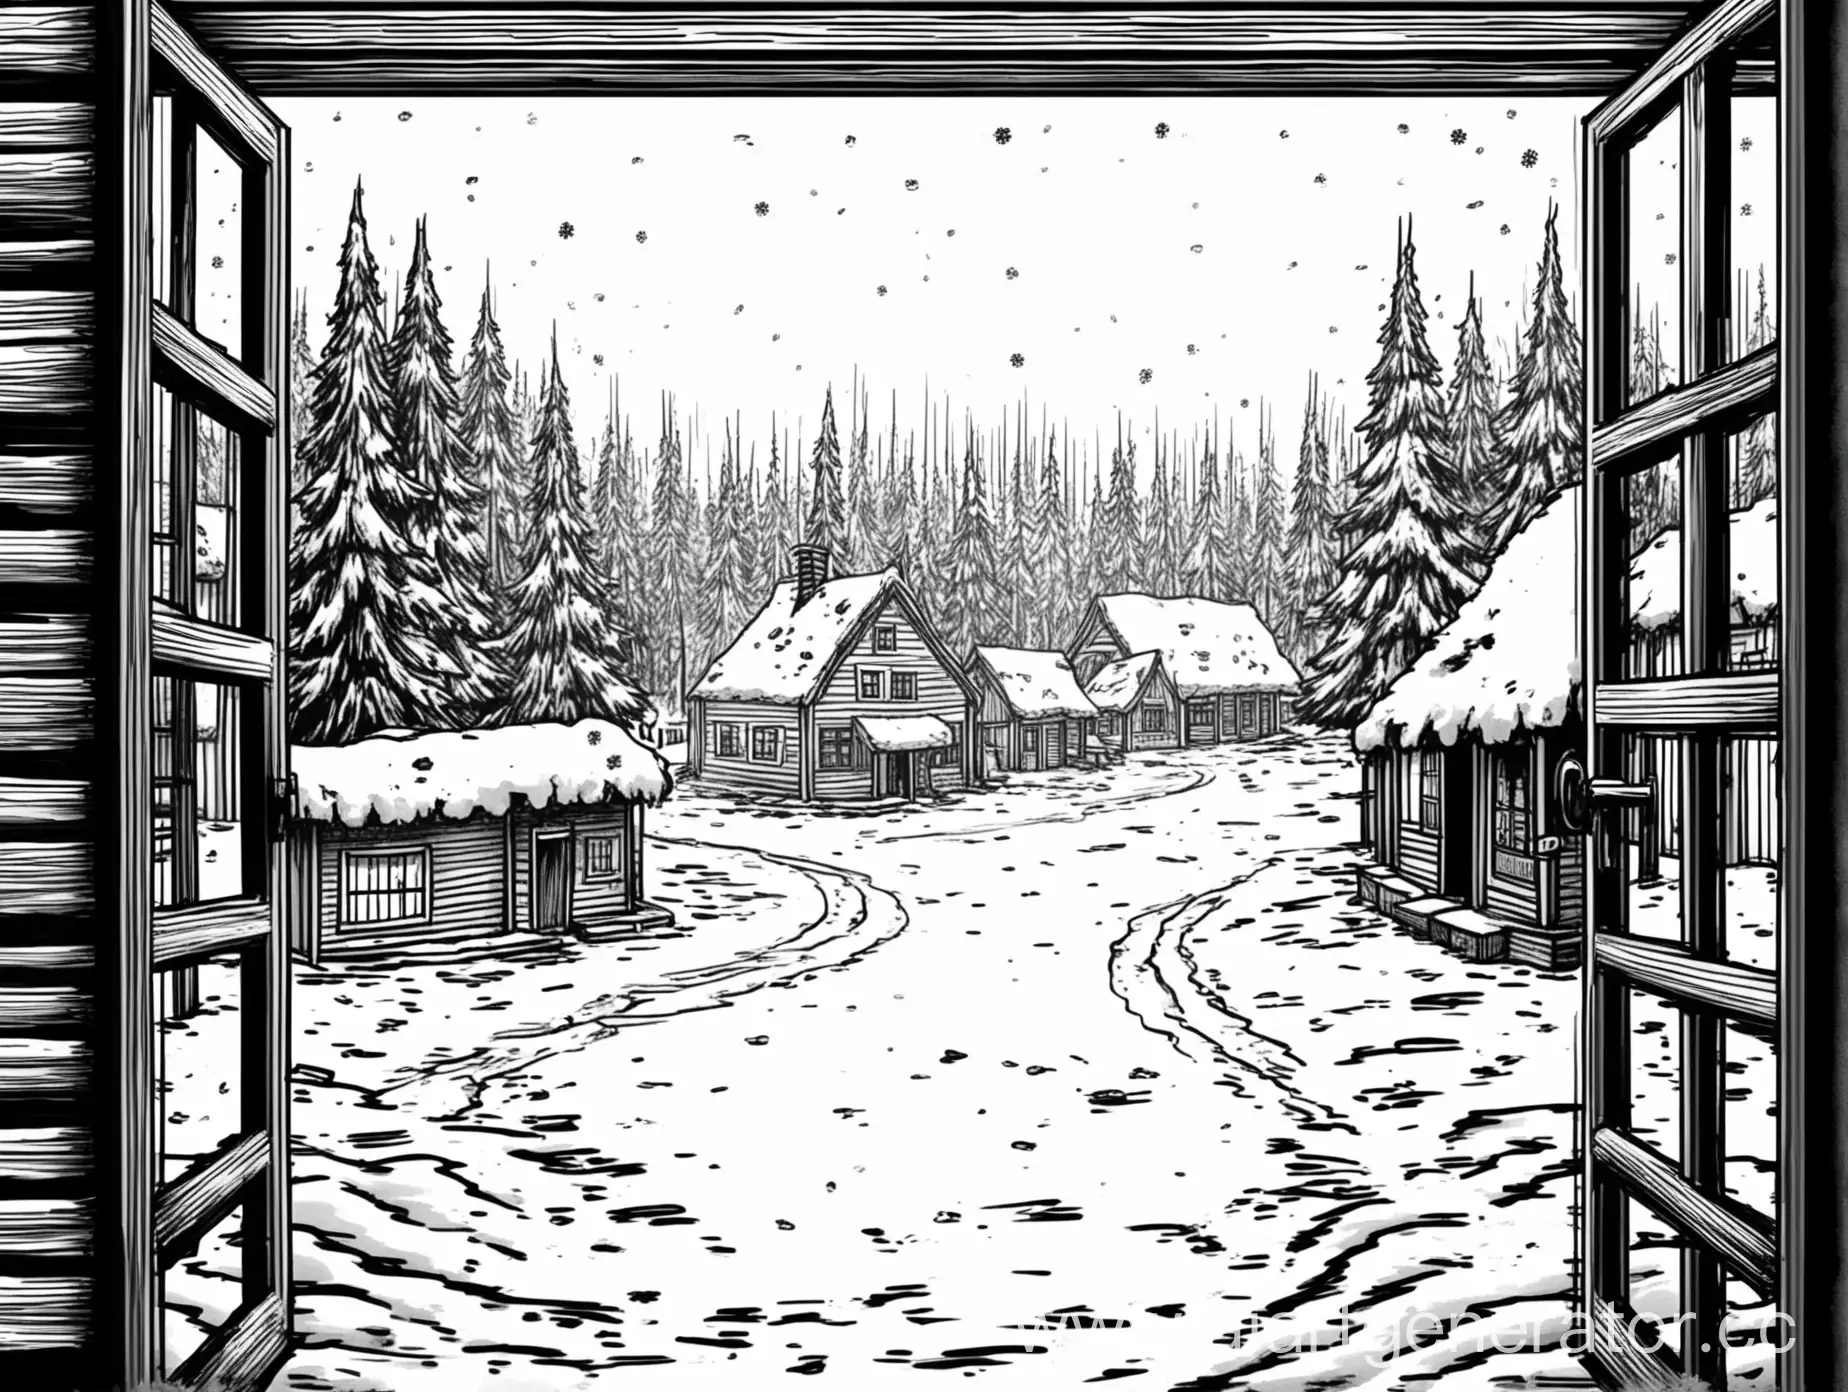 Empty village near a thick forest. Everything happens in winter. Black and white drawn style, view from the exit of a shop in first person